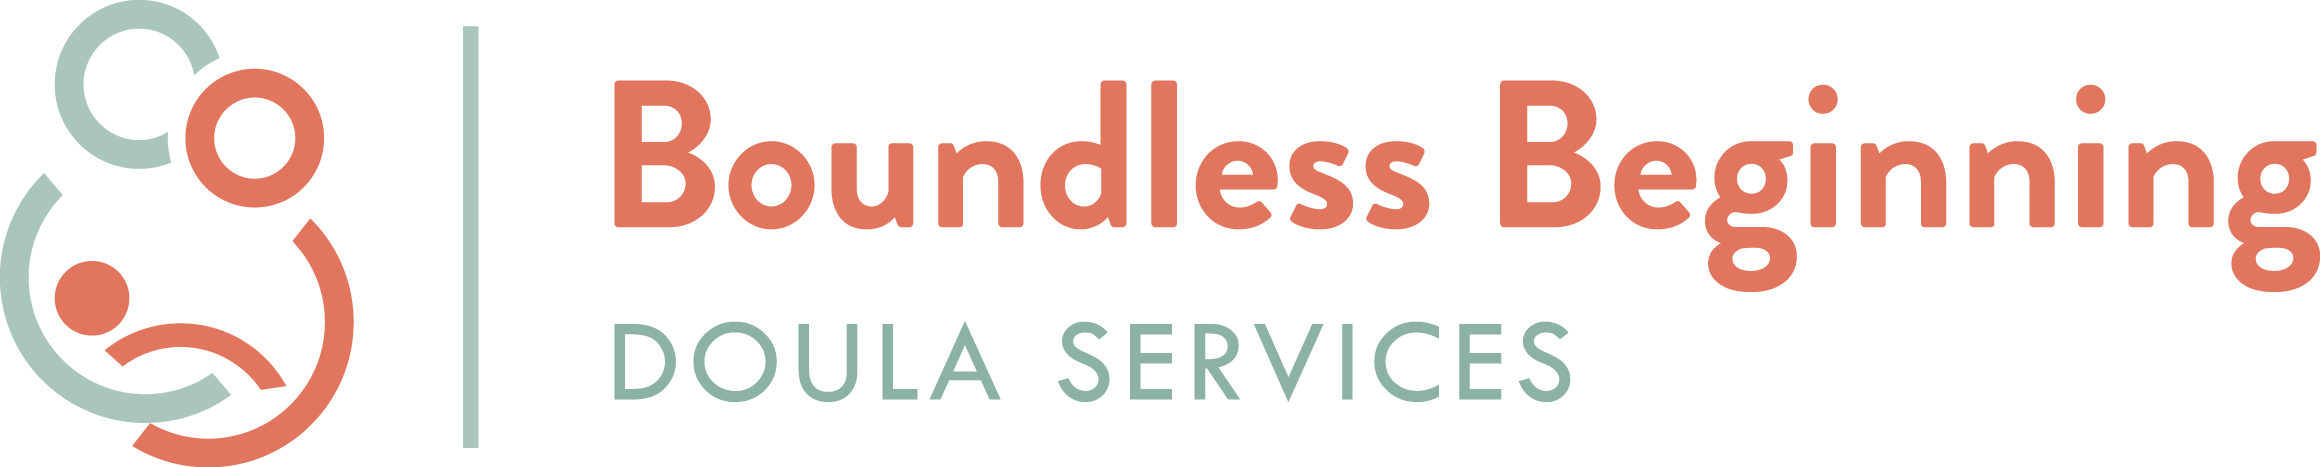 Boundless Beginning Doula Services